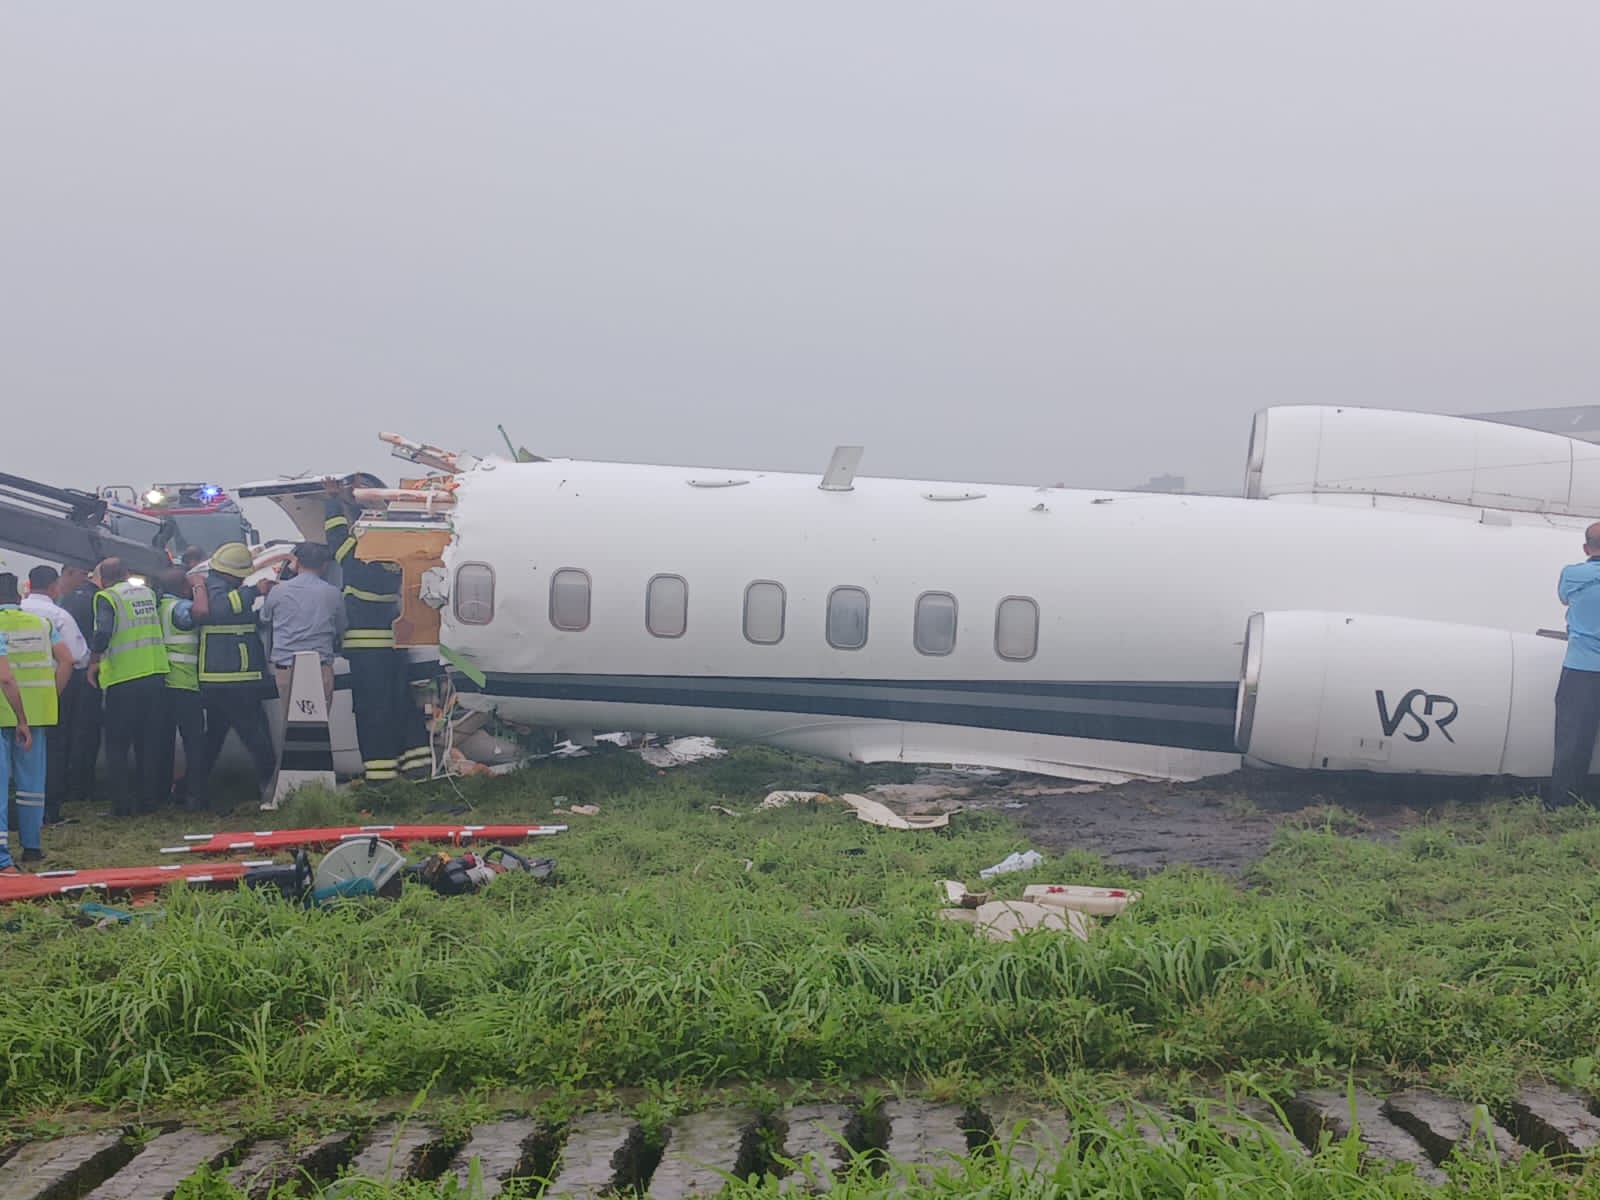 3 Injured As Private Aircraft With 8 Flyers Splits From Middle After Skidding Off Runway At Mumbai Airport